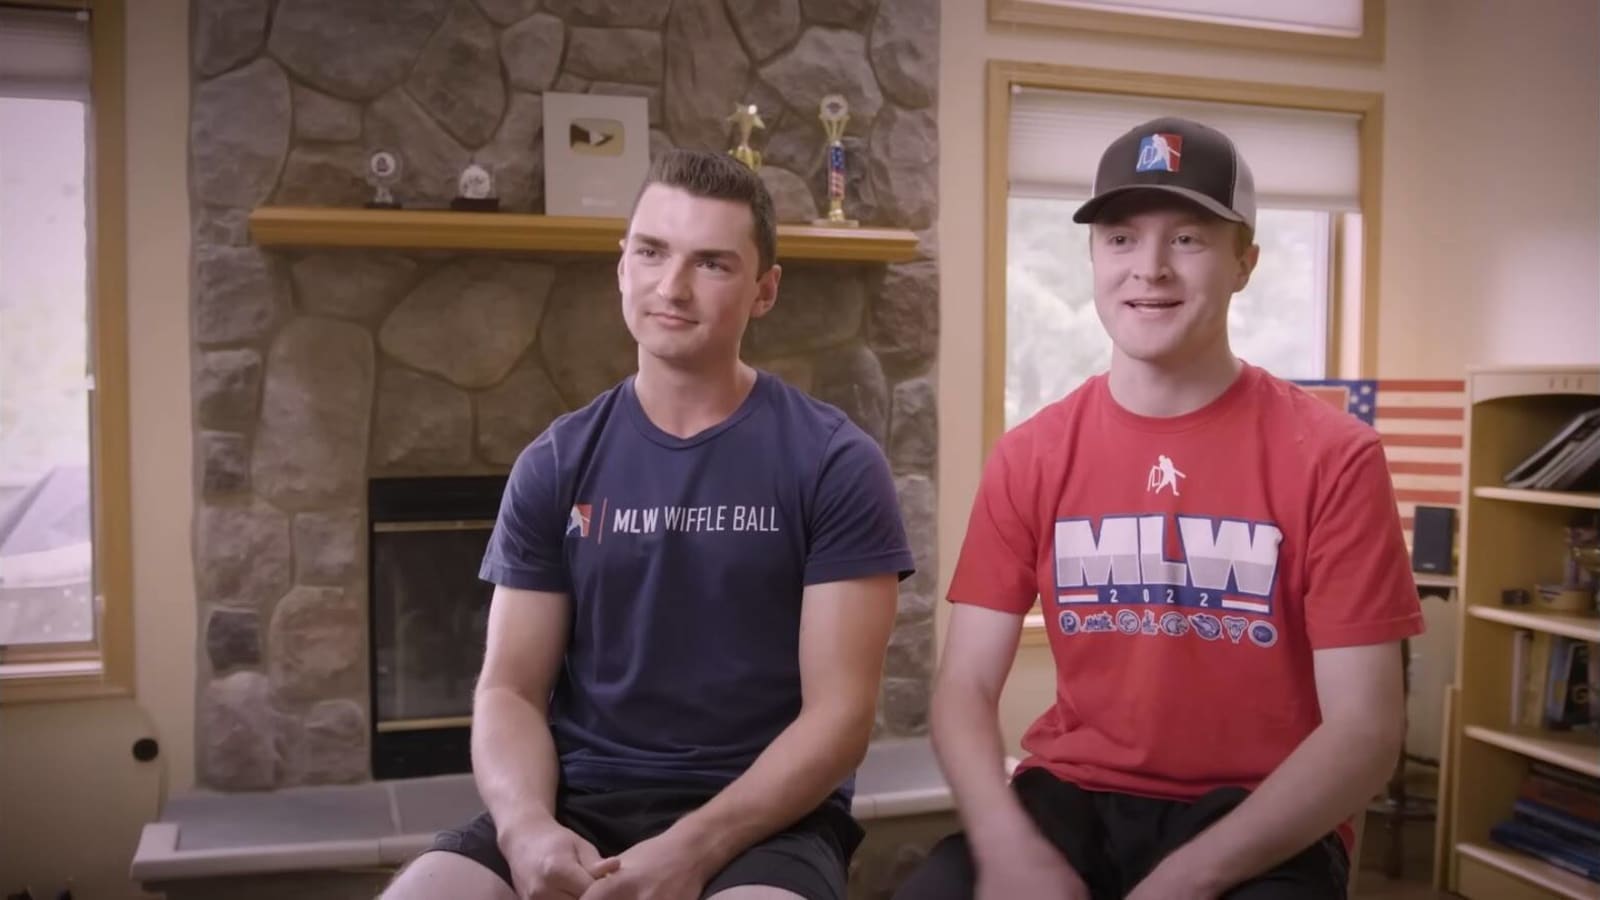 Watch: Learn how two college kids created a pro wiffle ball league in latest "My Hustle" episode